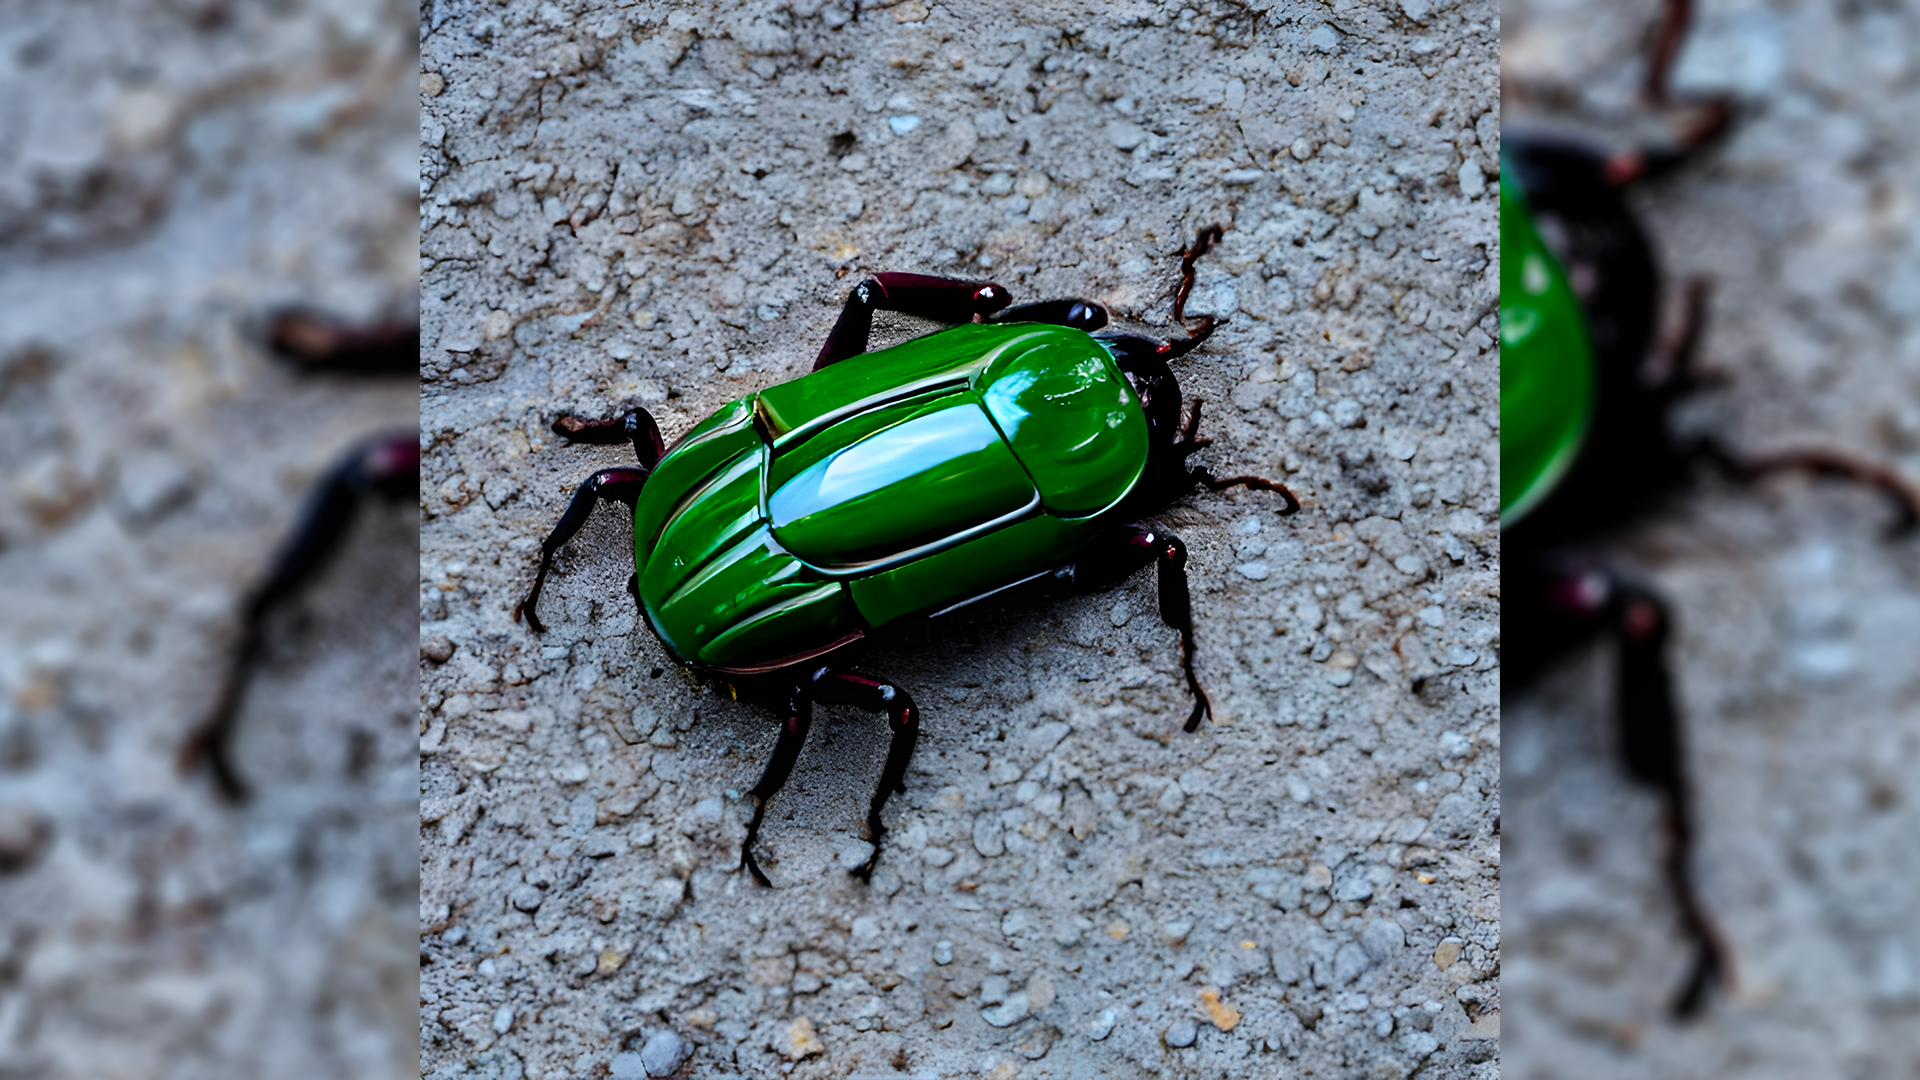 WE ARE ALL BEETLES – Jacob Wood